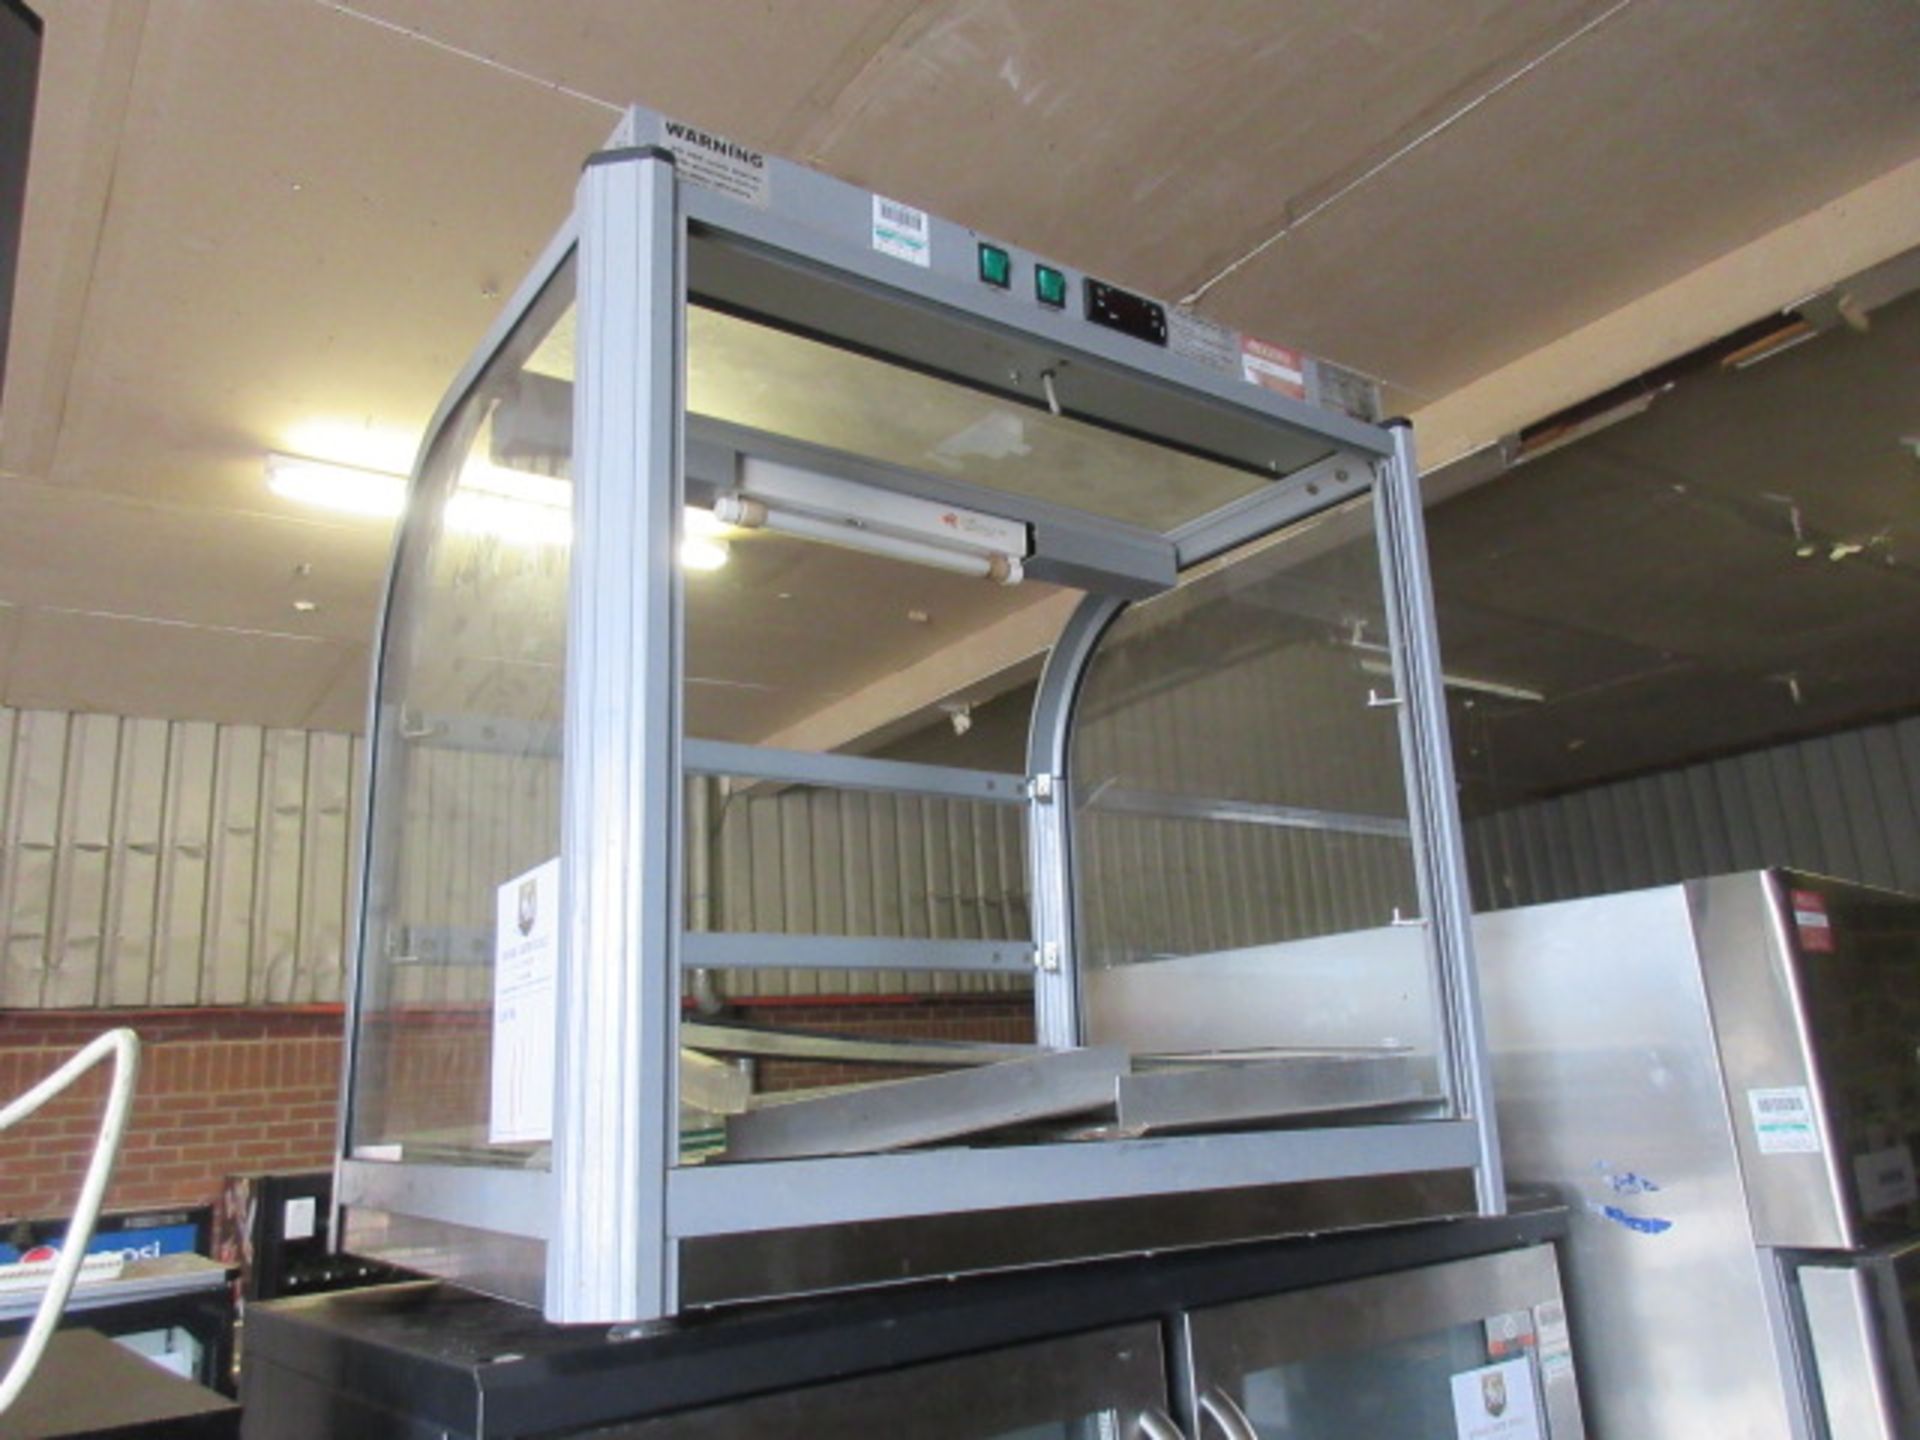 Lincat A001 Pie Warmer. Work top type, Glass cabinet, 1424-1500w, 240v, size 750 x 550 x 700mm high. - Image 2 of 3